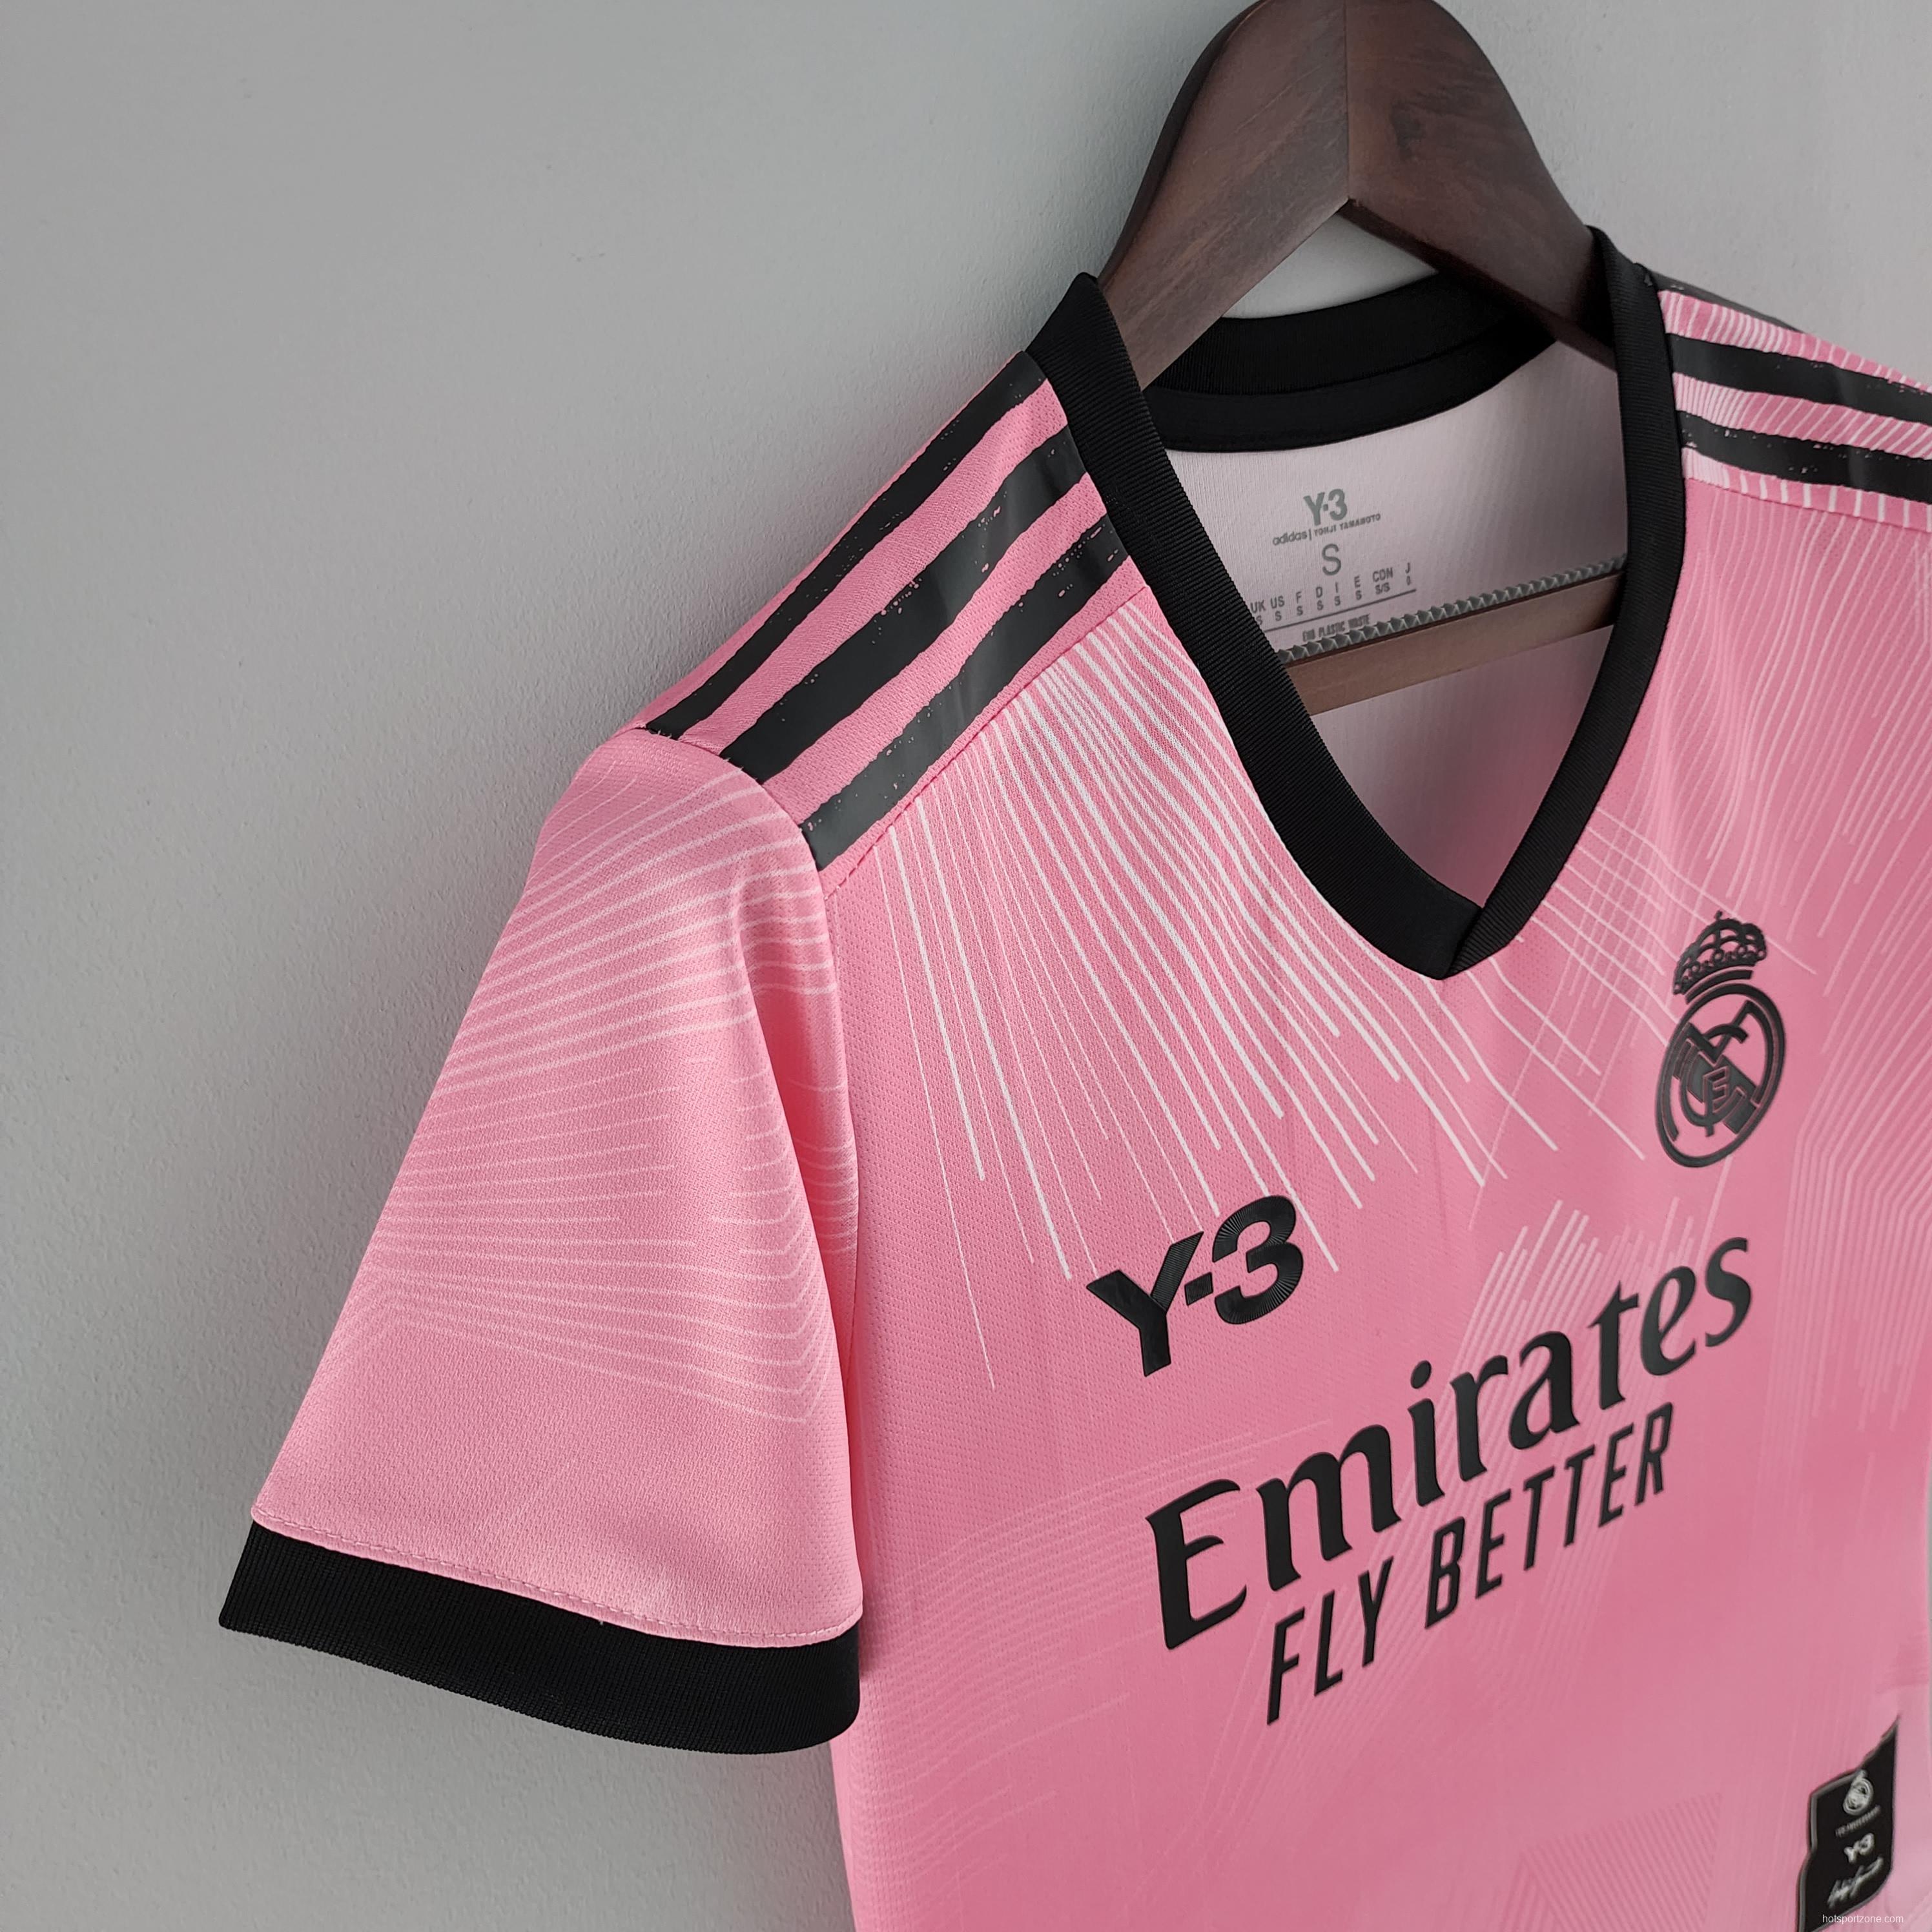 2022 Woman Real Madrid Y3 Edition Pink Jersey